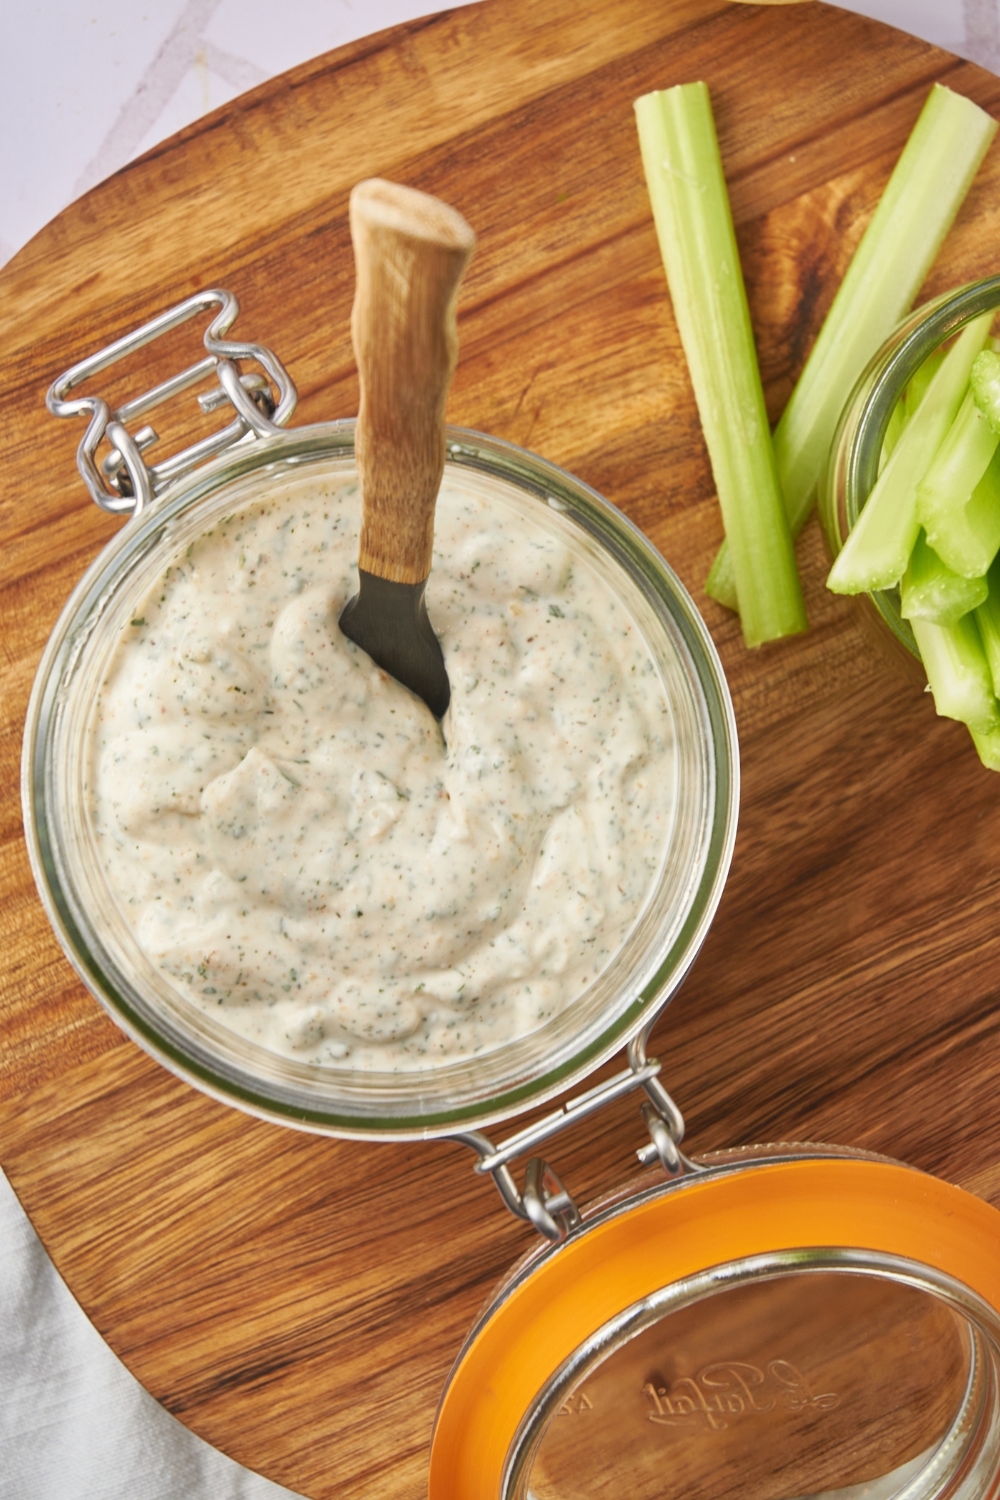 A mason jar with homemade ranch dressing in it. A jar with celery stalks is served next to it.